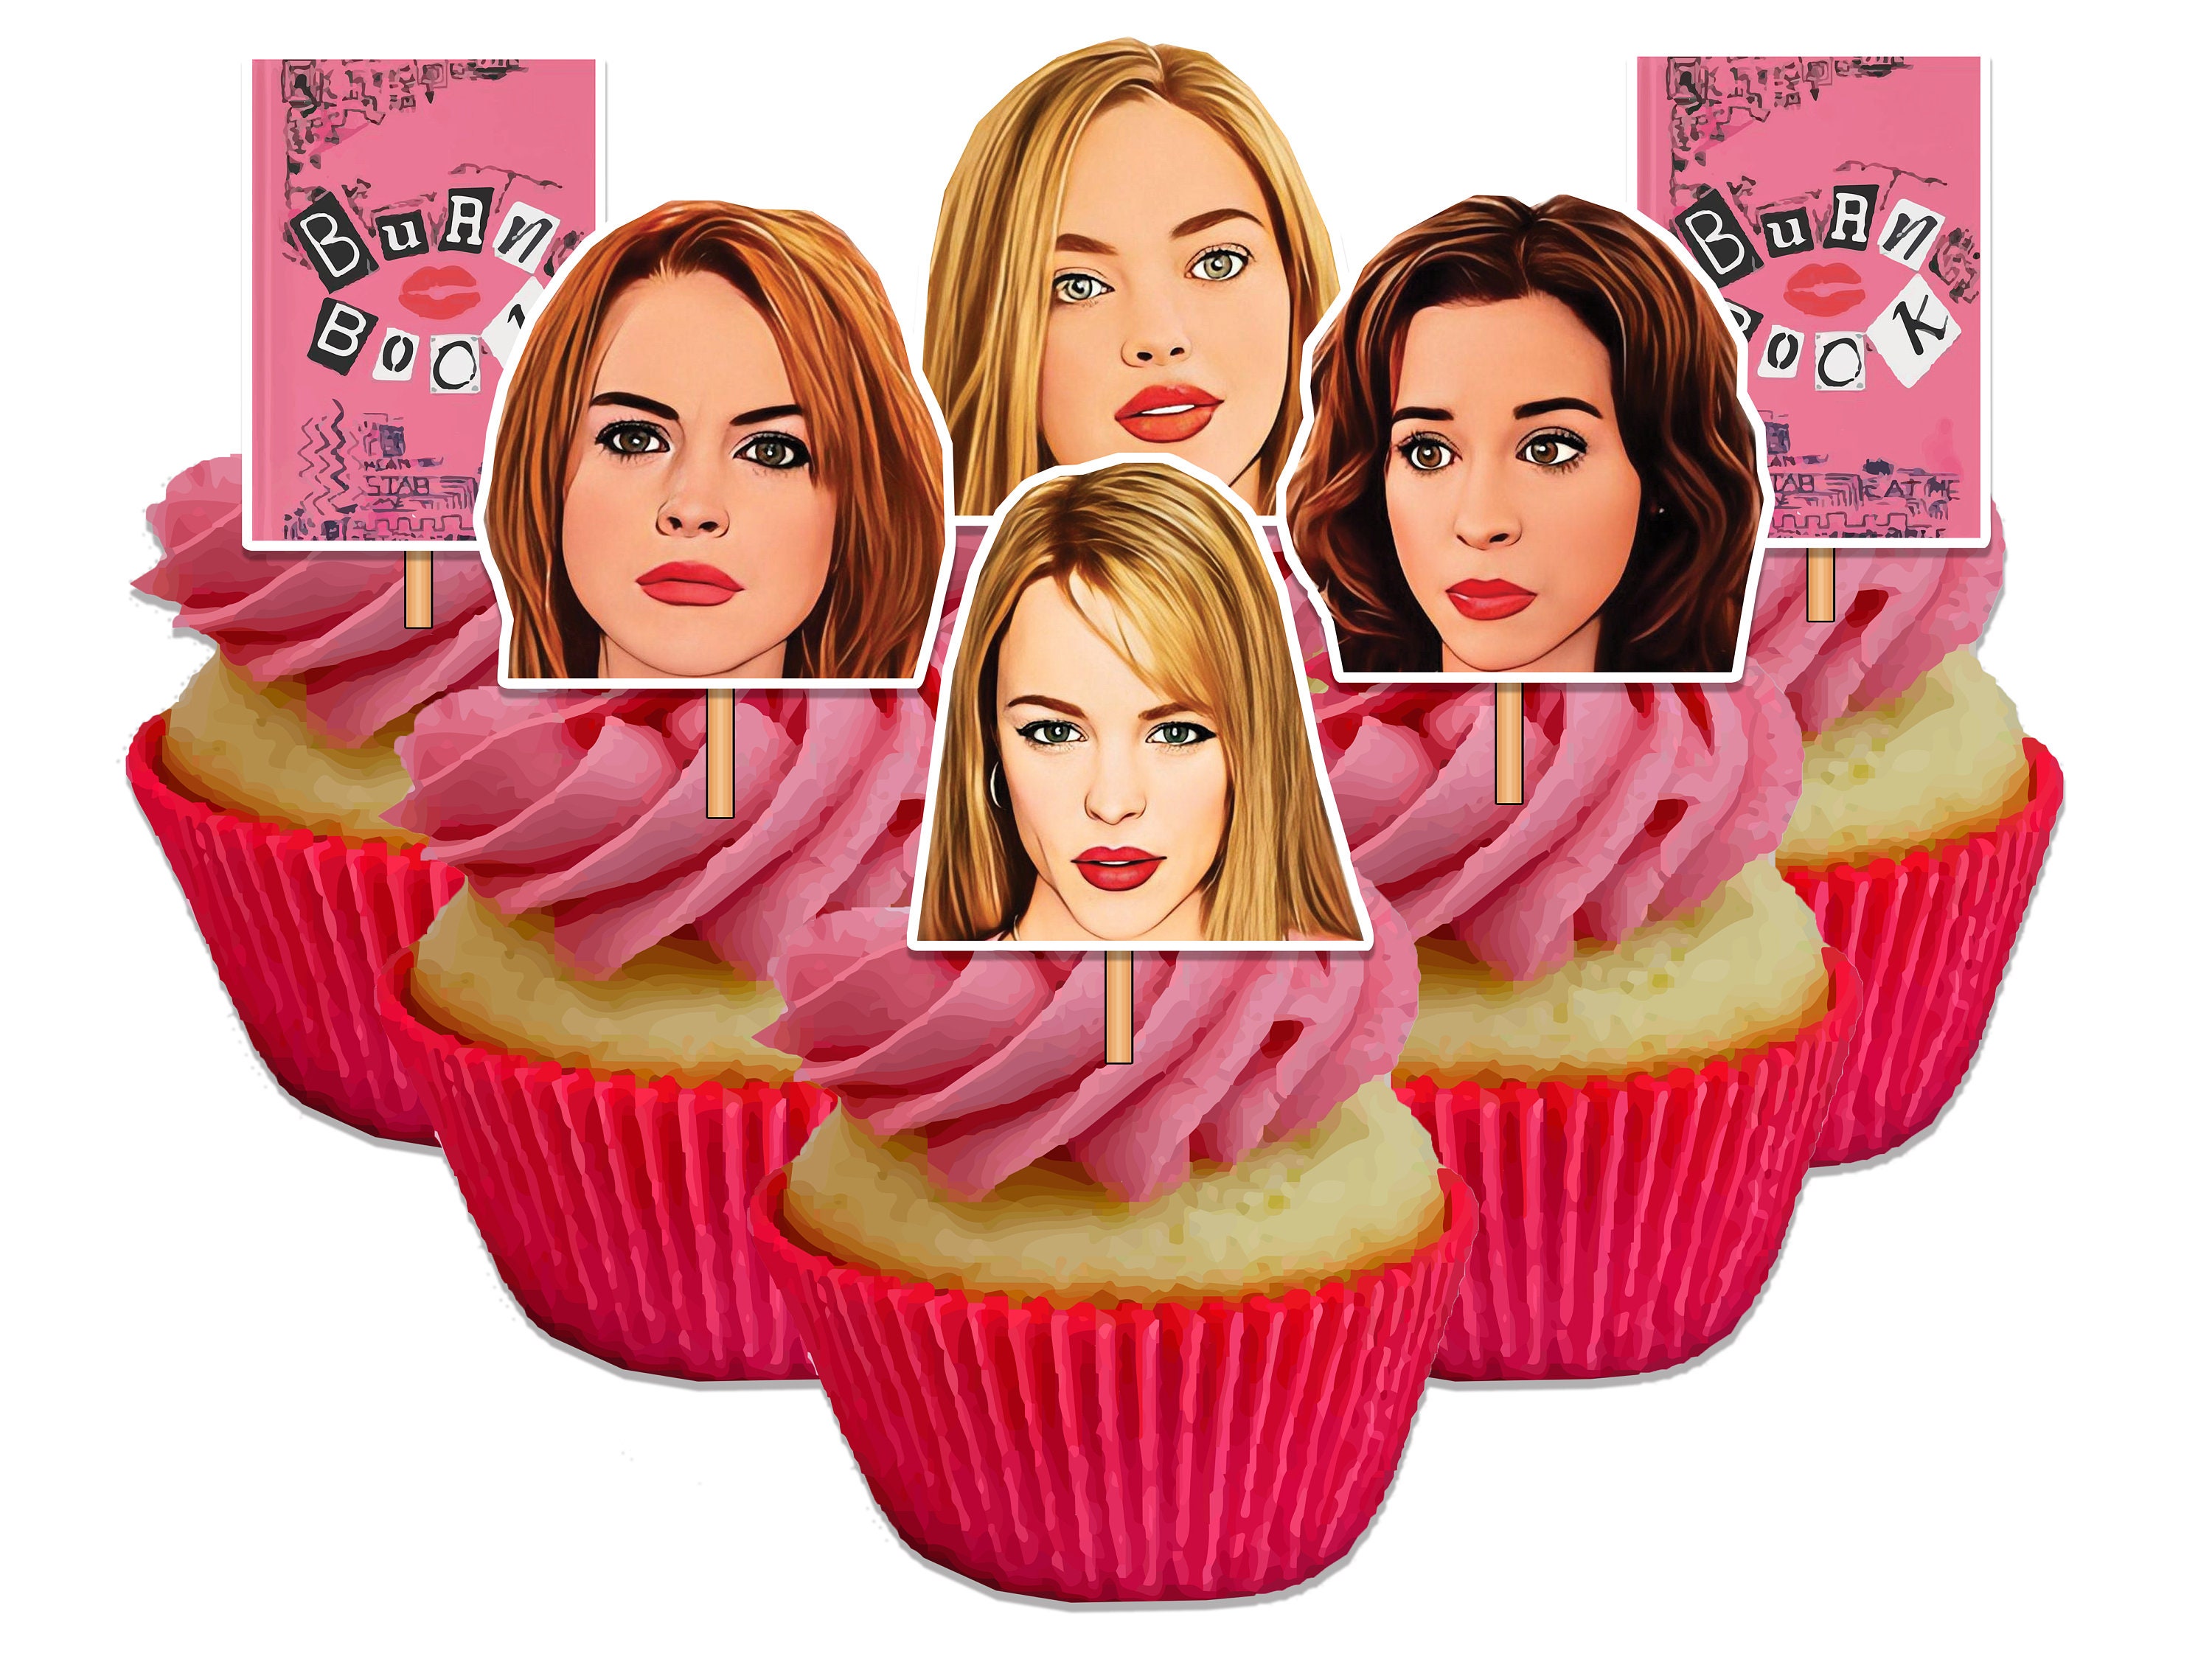 37 PCS Mean Girls Cupcake Toppers for Mean Girls Theme Party Birthday Party  Wedding Baby Shower Fans Party Cake Dessert Decorations Supplies Picks